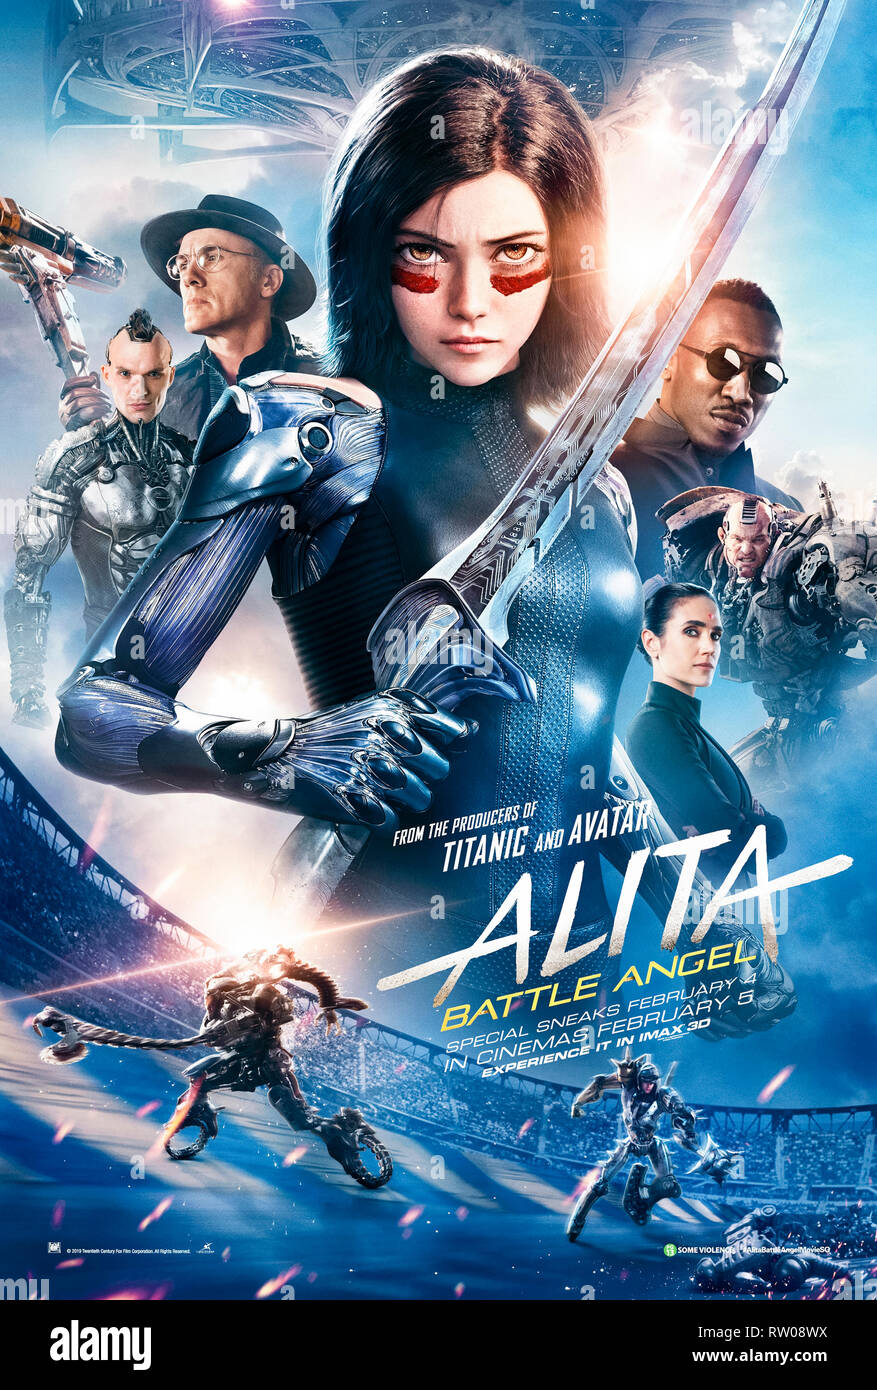 Alita: Battle Angel (2019) directed by Robert Rodriguez and starring Rosa Salazar, Christoph Waltz and Jennifer Connelly. A female cyborg fights back. Stock Photo